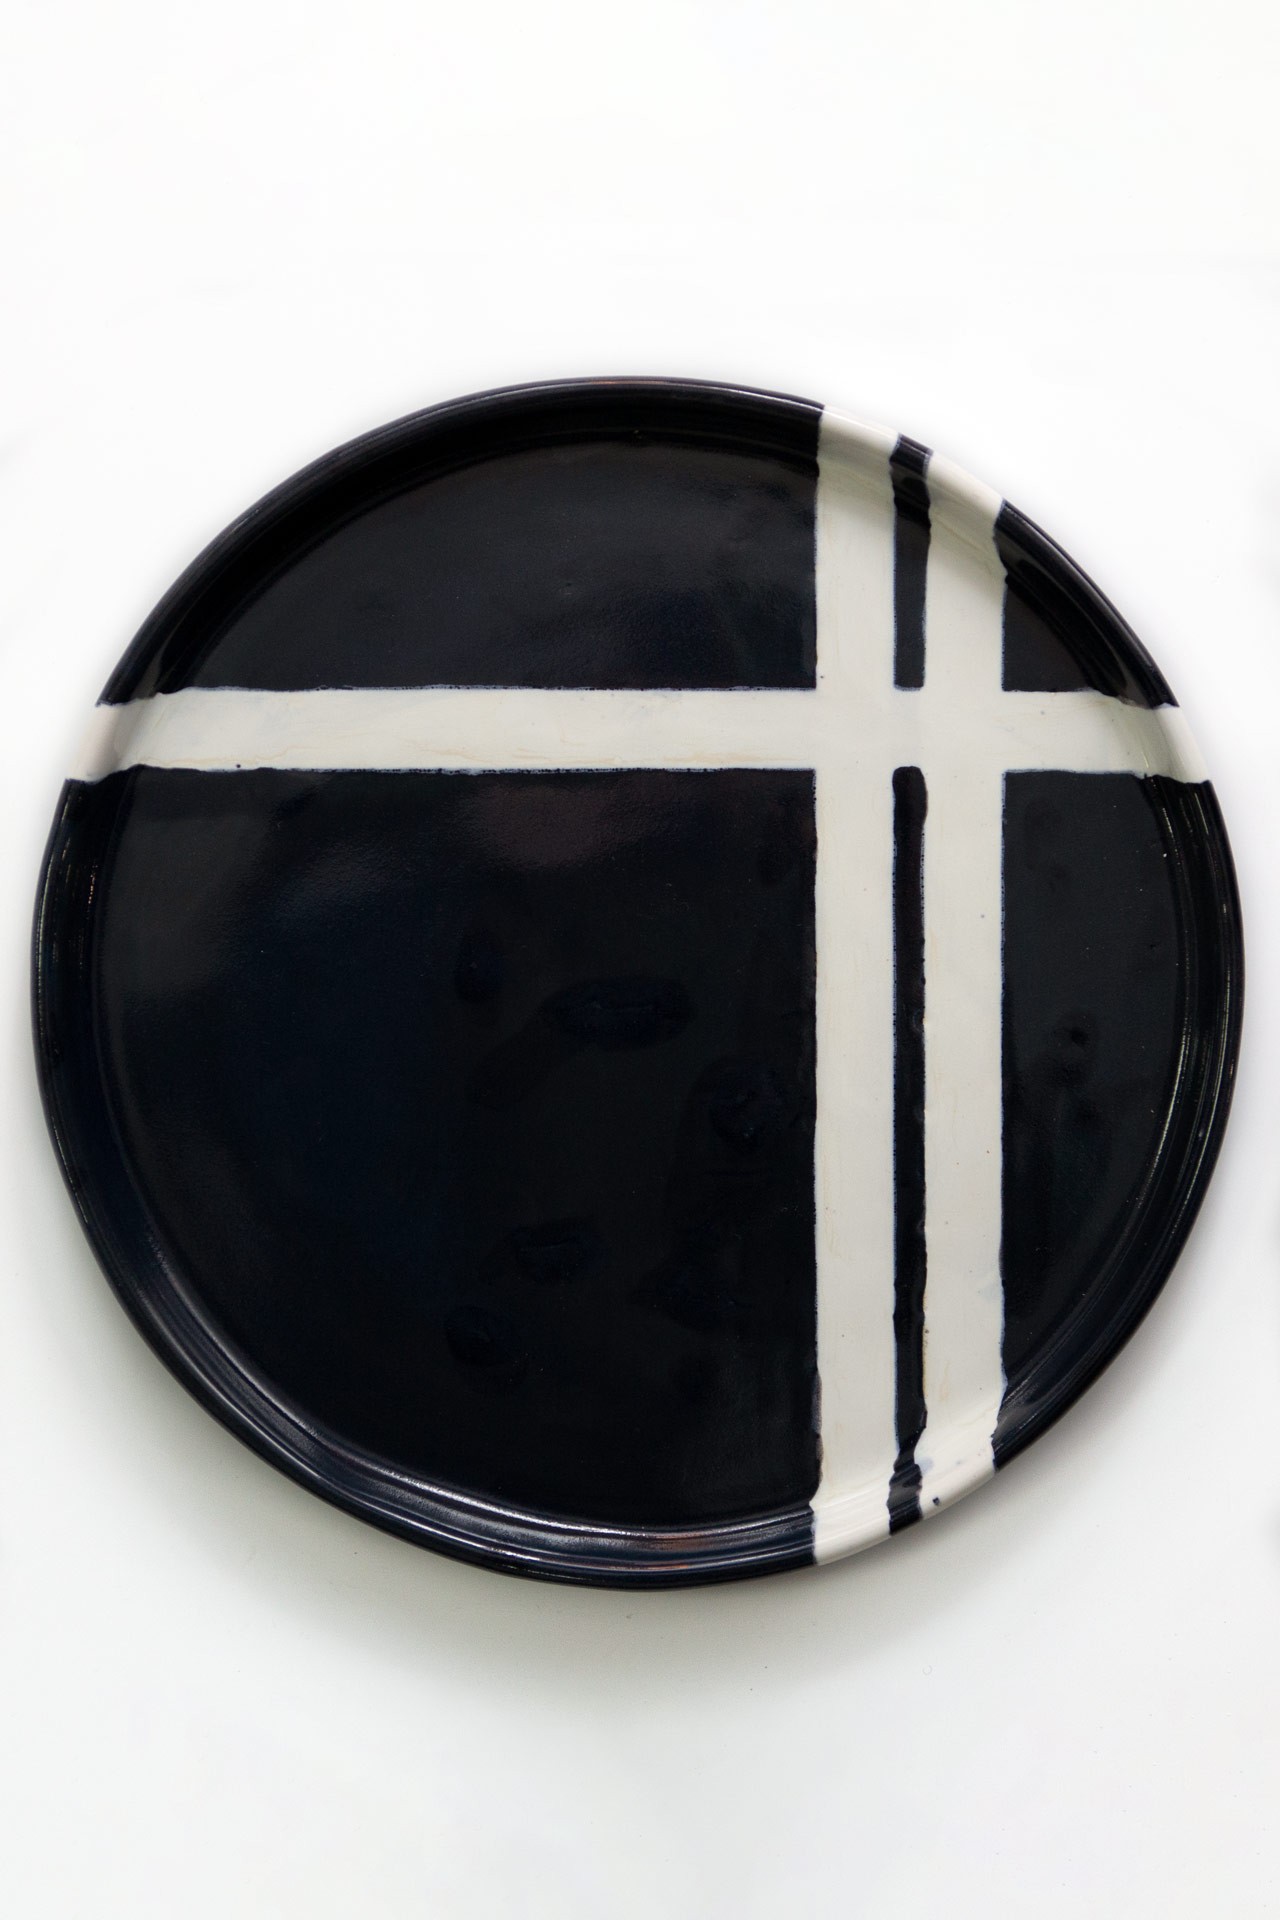 Hand-made dish with flat sides of black color with white stripes